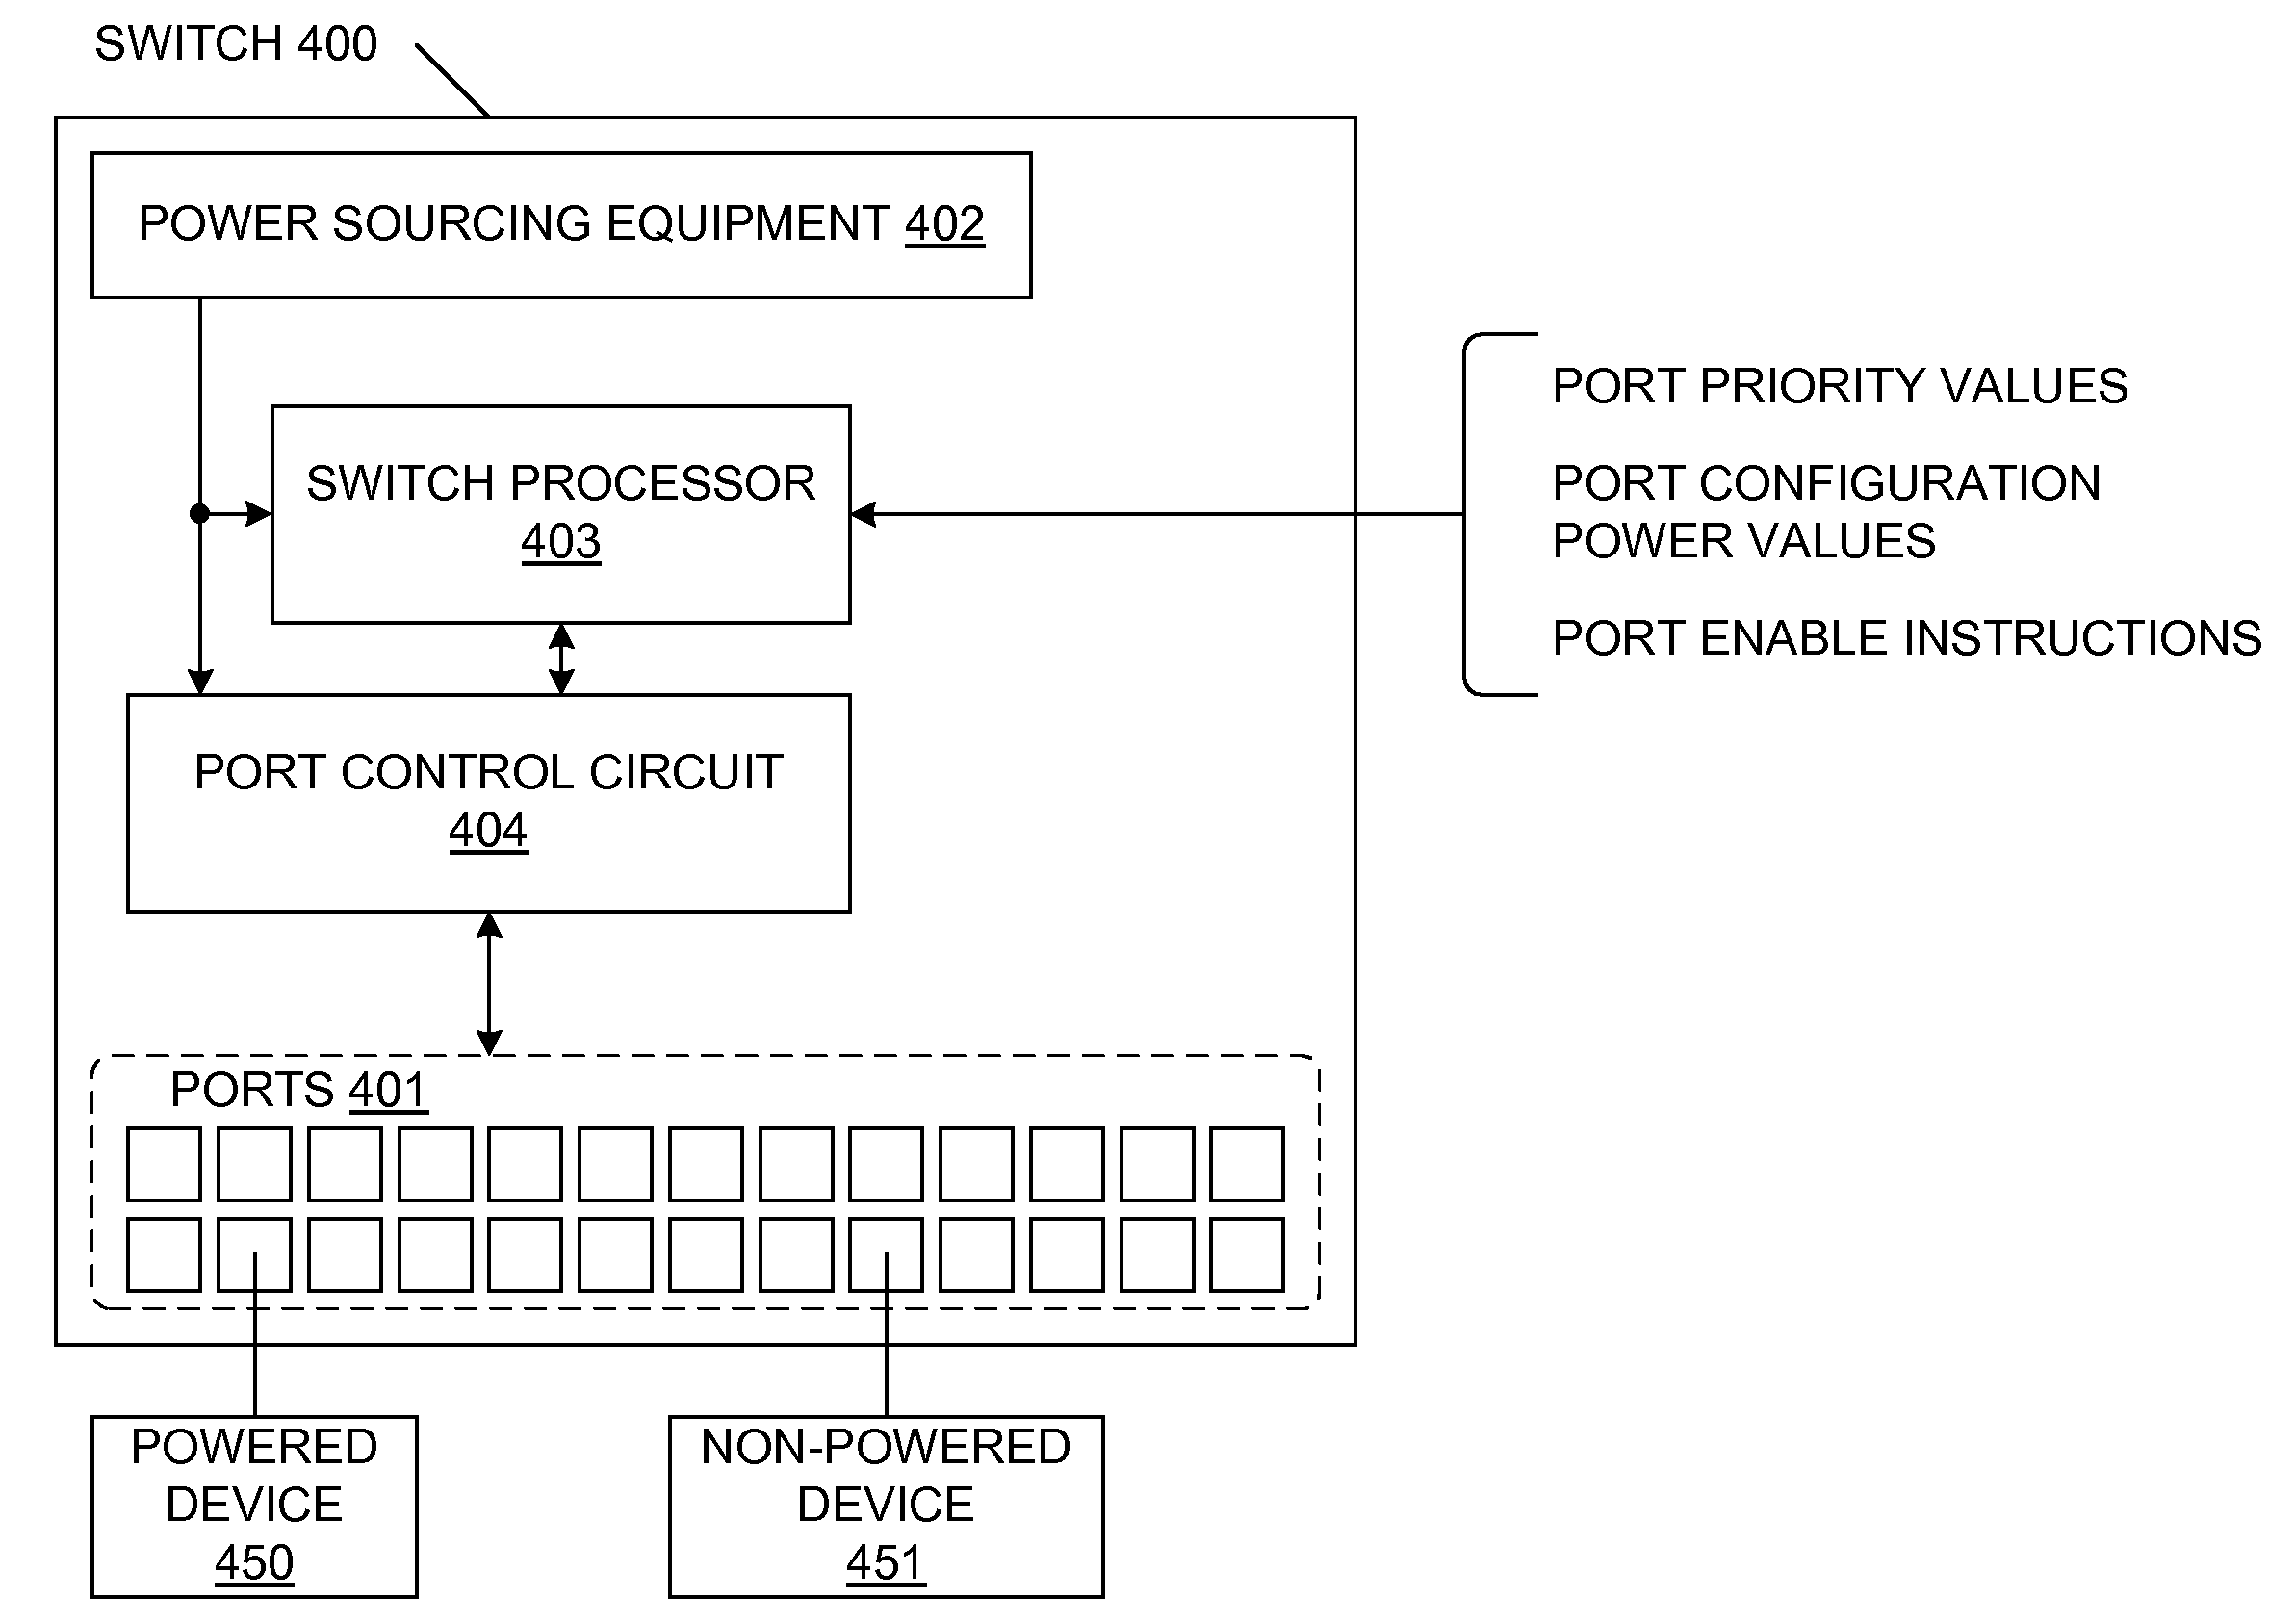 Managing Power Allocation To Ethernet Ports In The Absence Of Mutually Exclusive Detection And Powering Cycles In Hardware